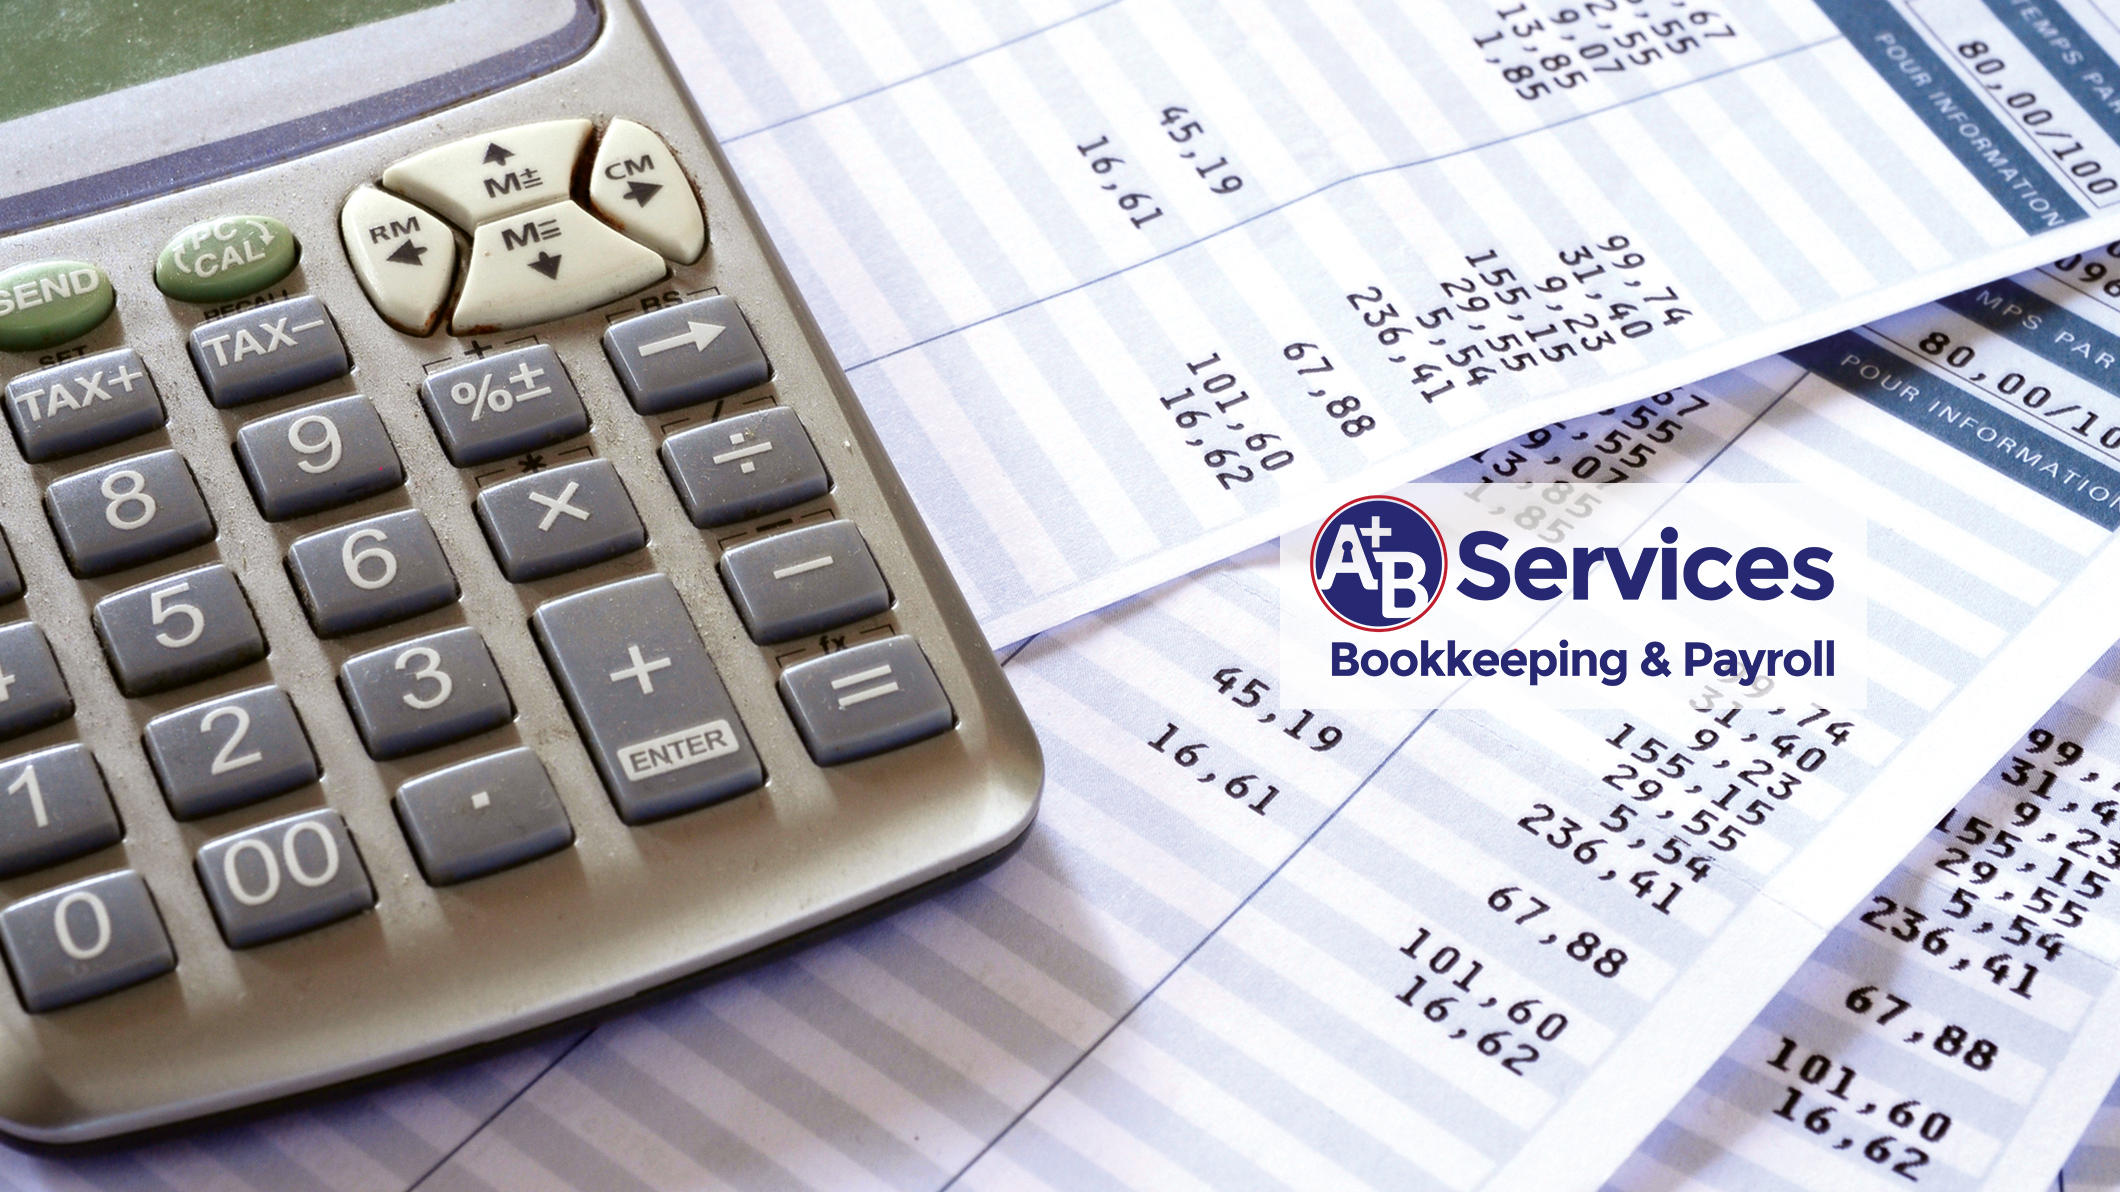 A Plus B Services, Bookkeeping & Payroll Photo